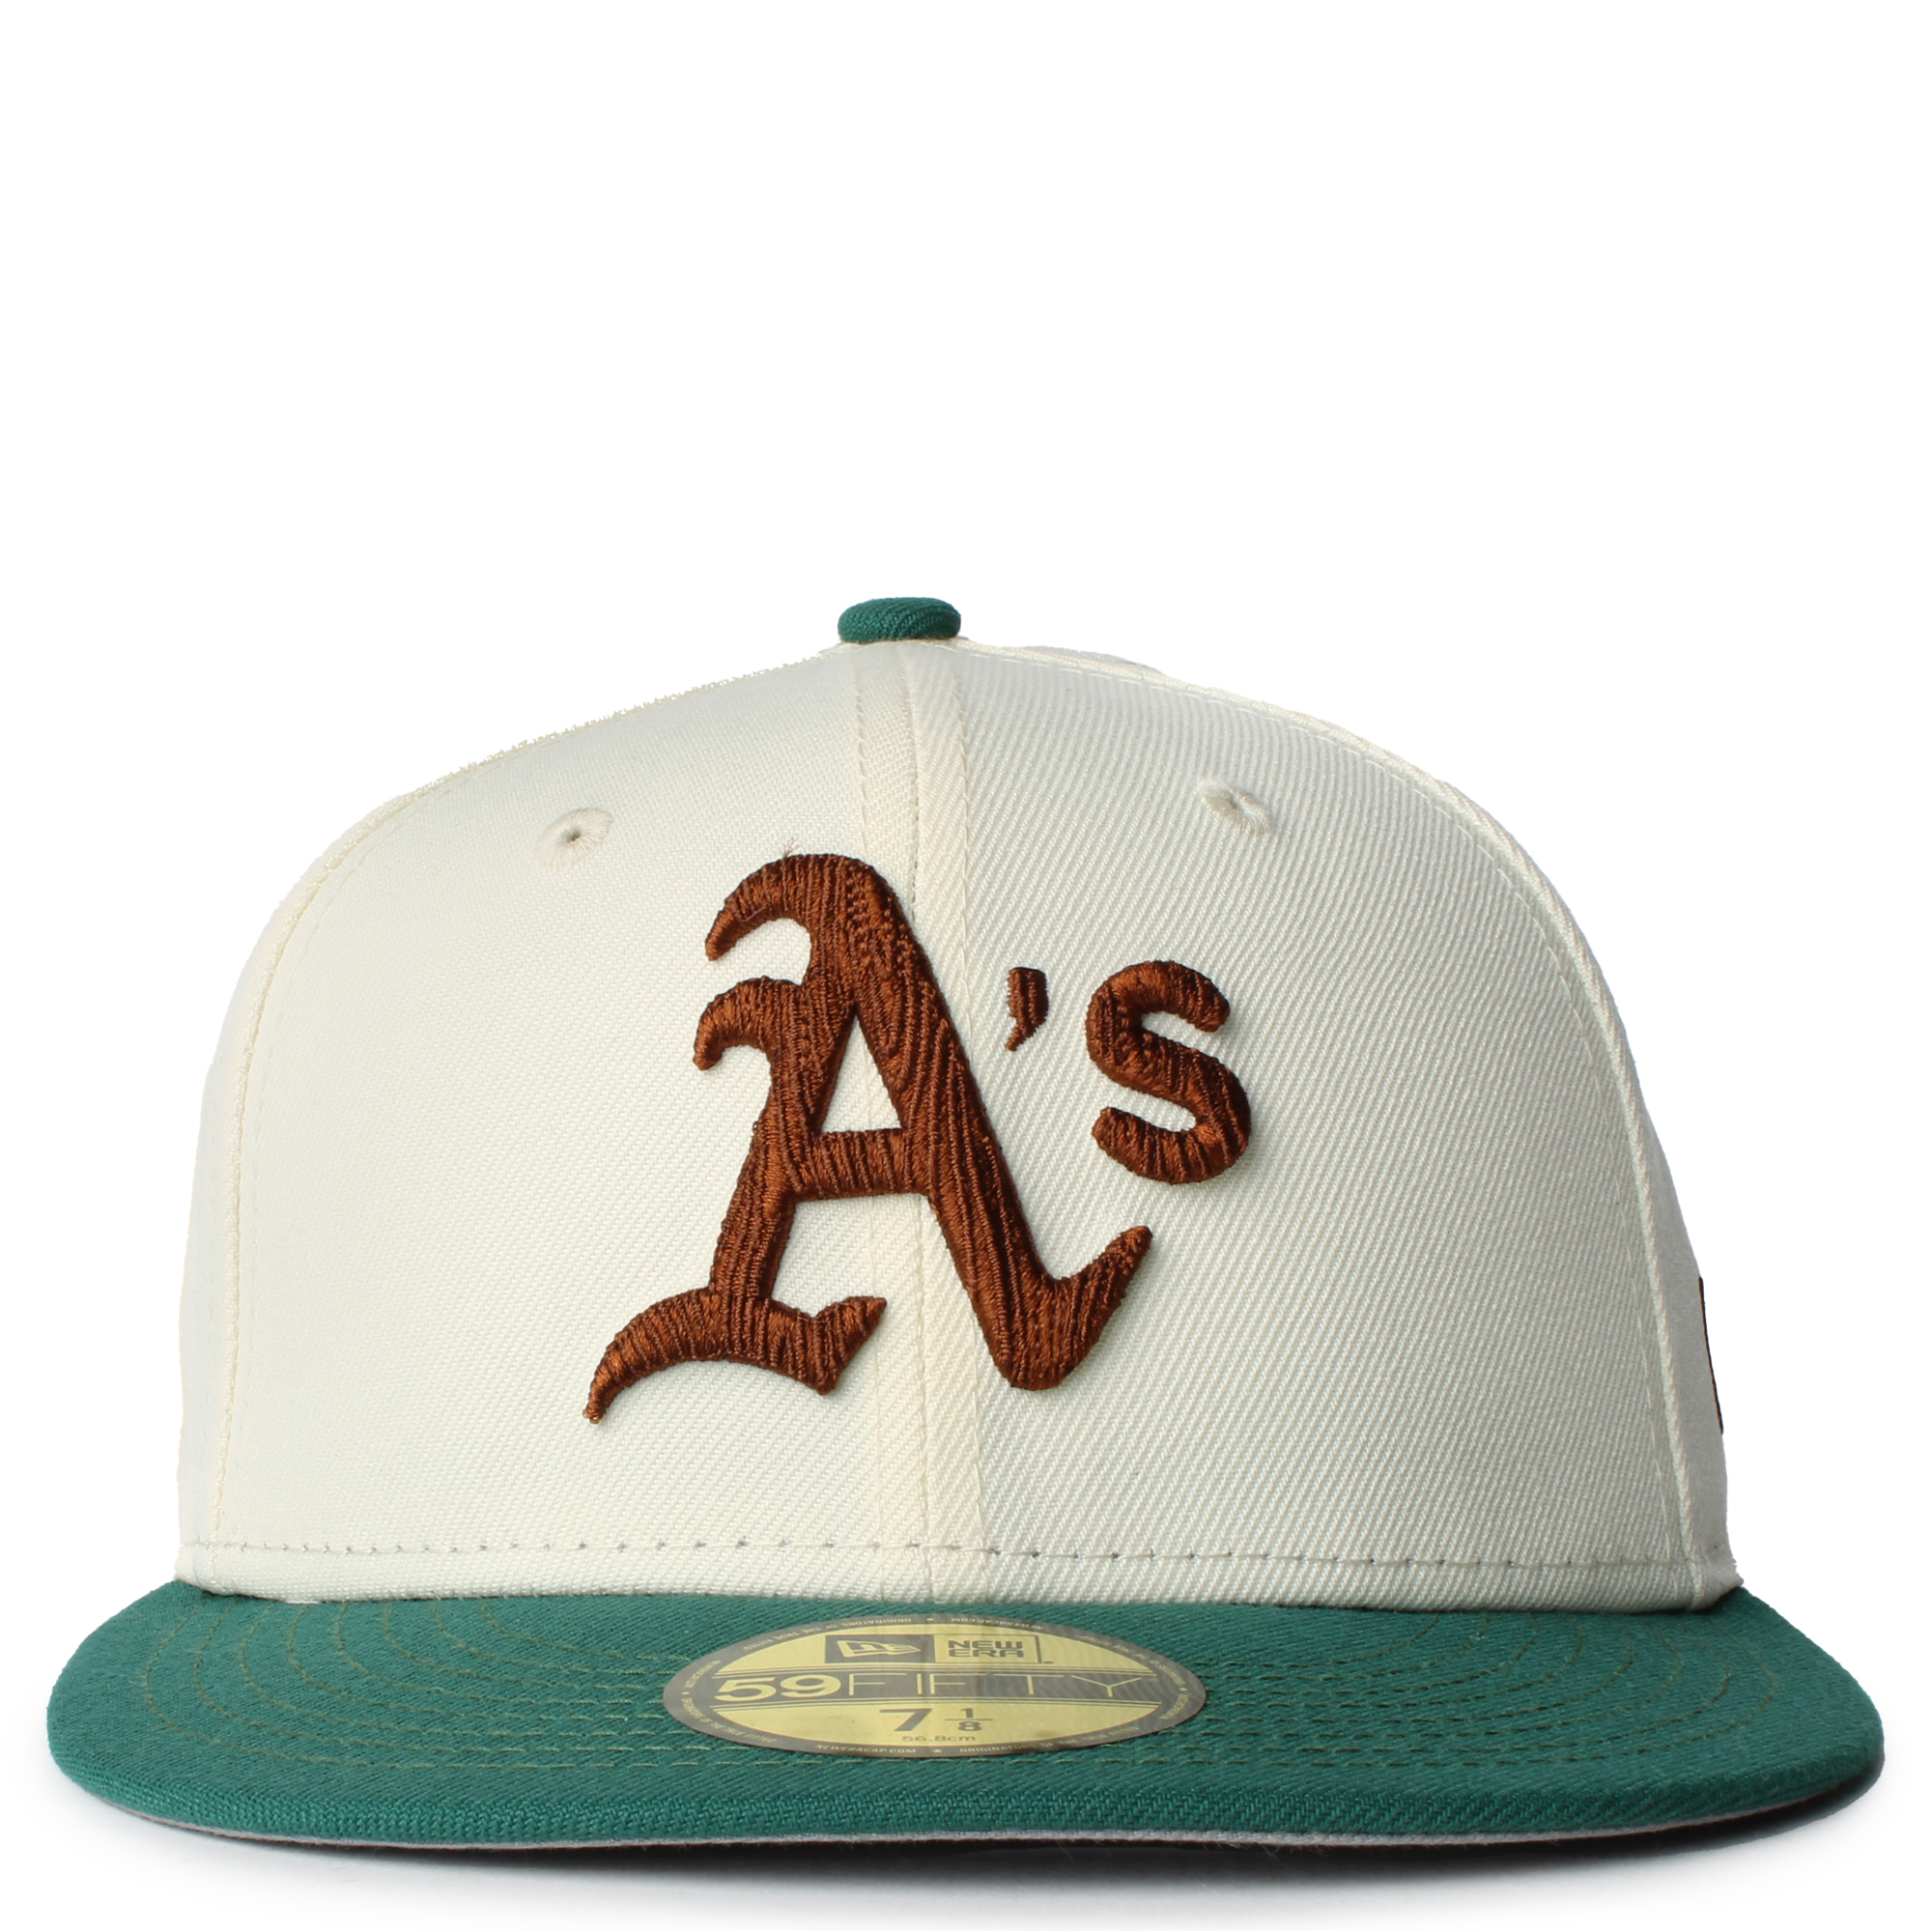 Oakland Athletics Men’s New Era Arch 59FIFTY Fitted Hat